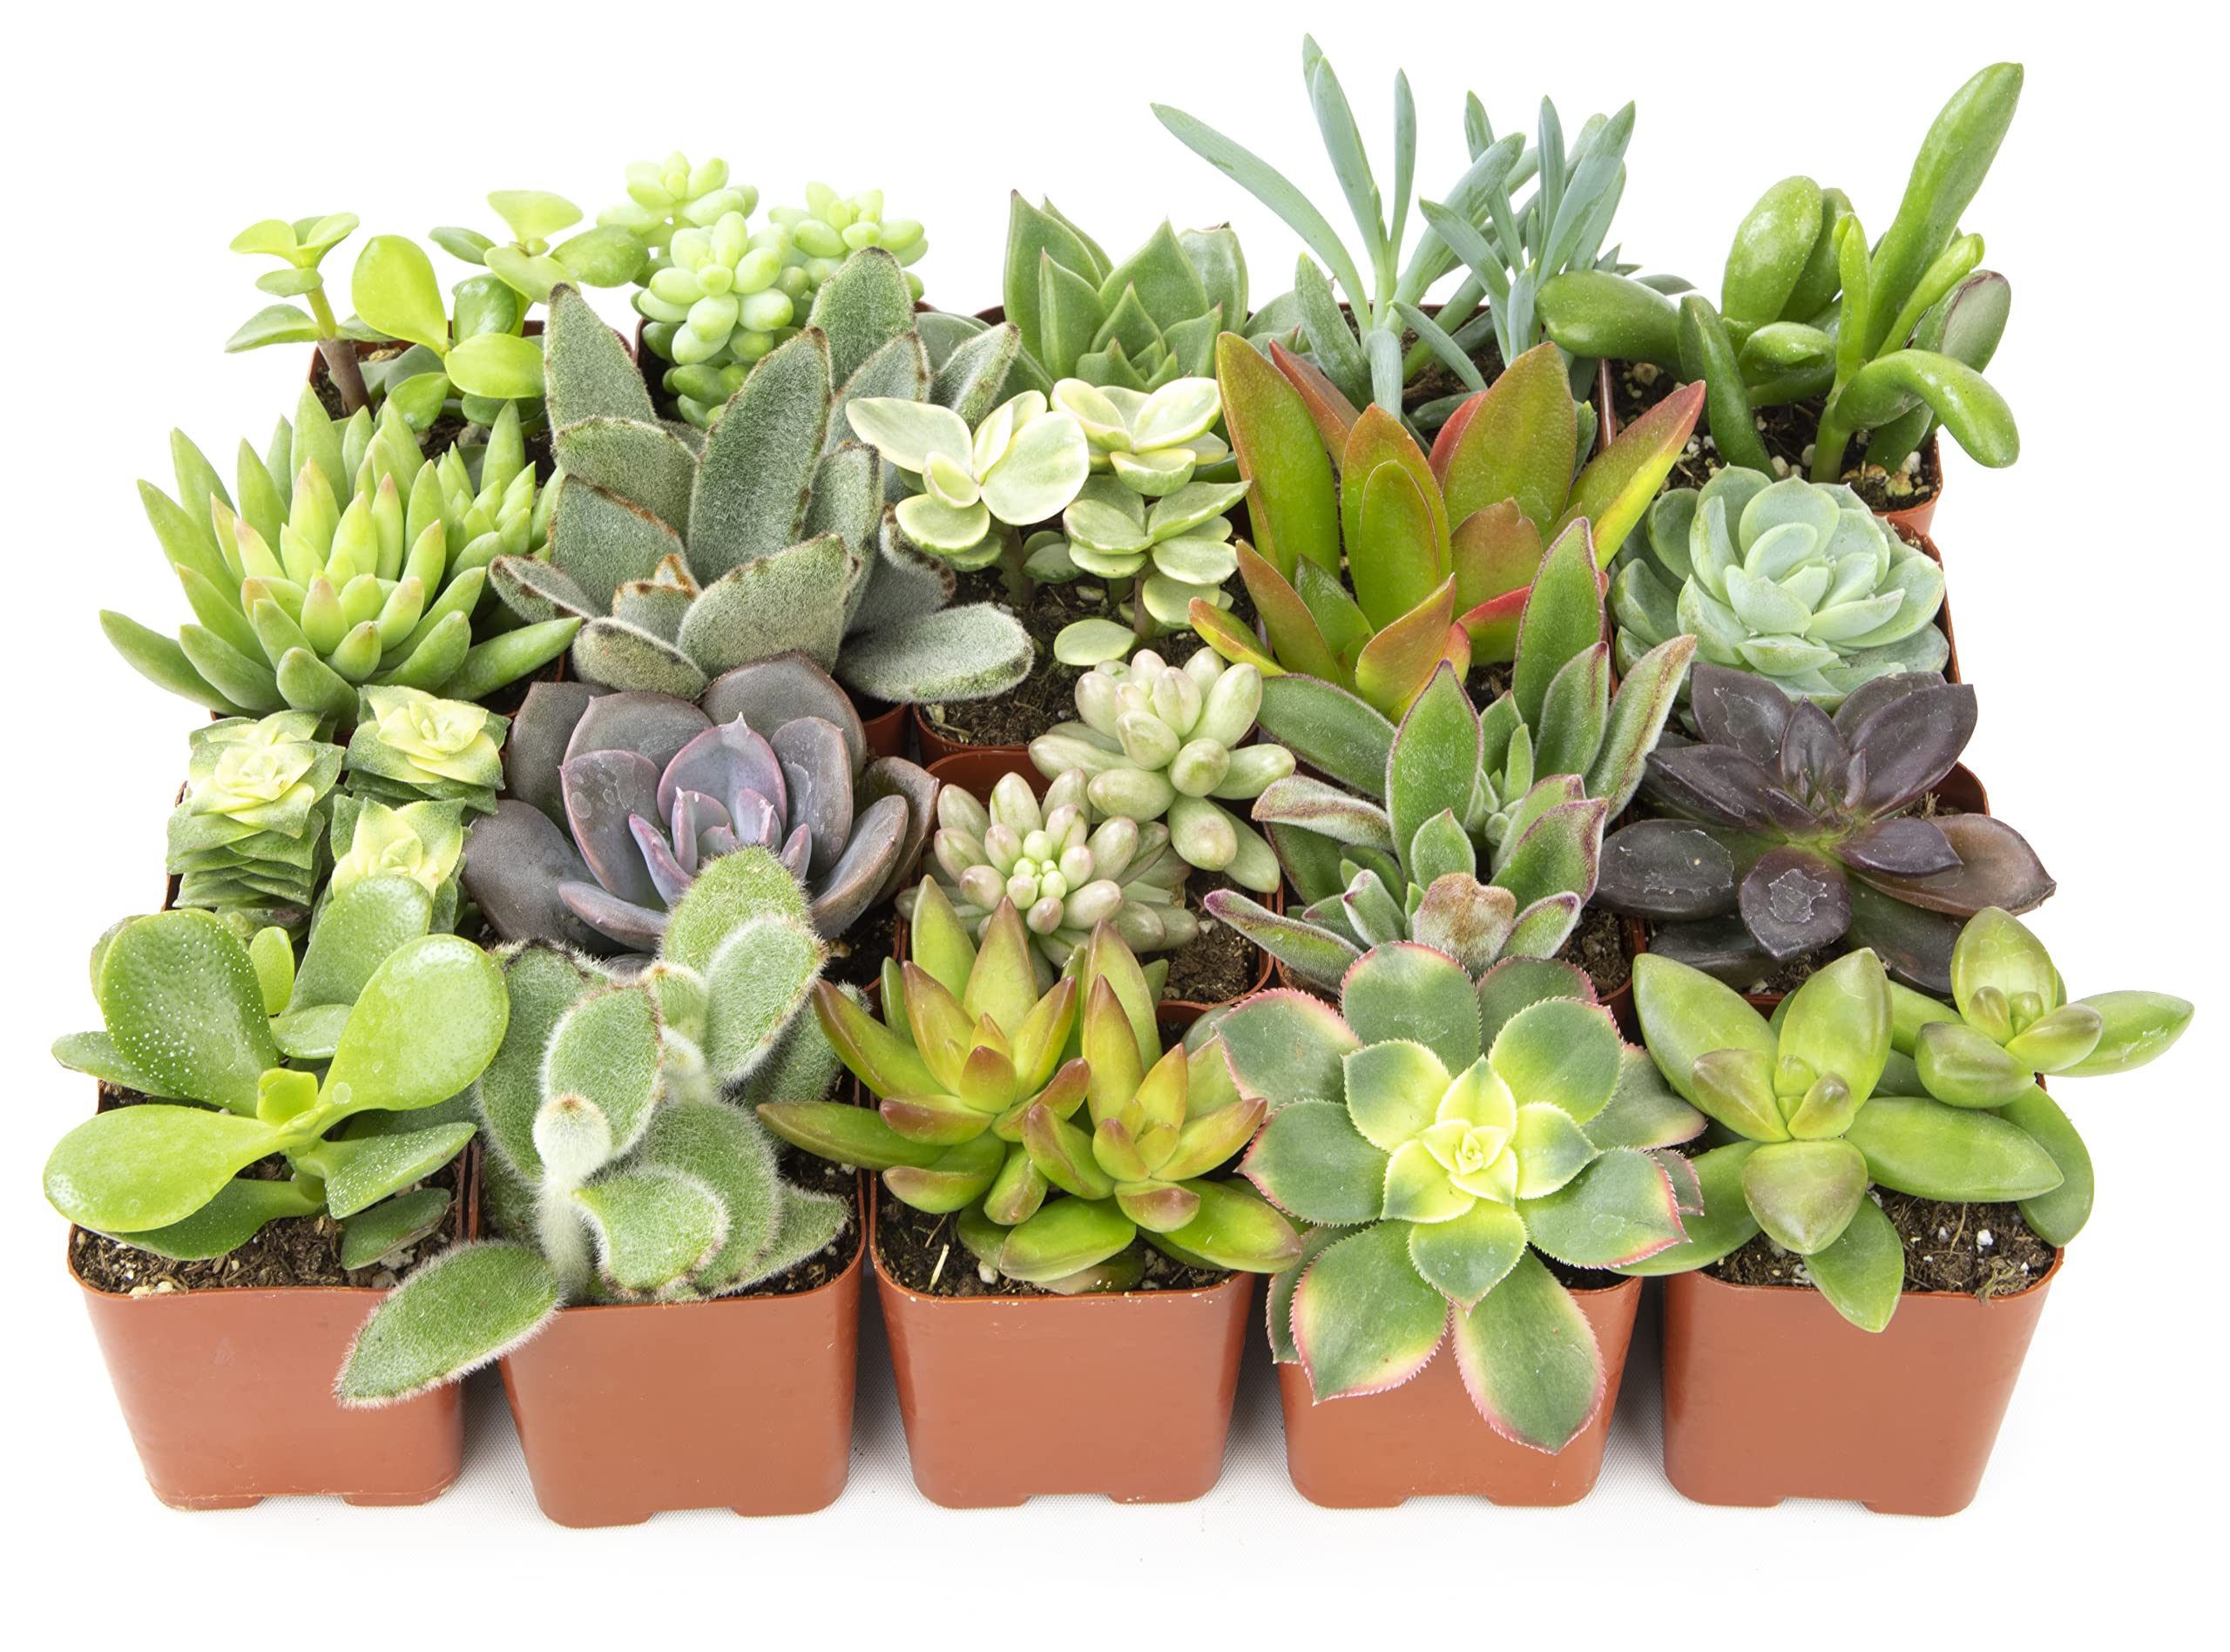 20-Pack Altman Plants Assorted Potted Live Succulent Plants $25.97 + Free Shipping w/ Prime